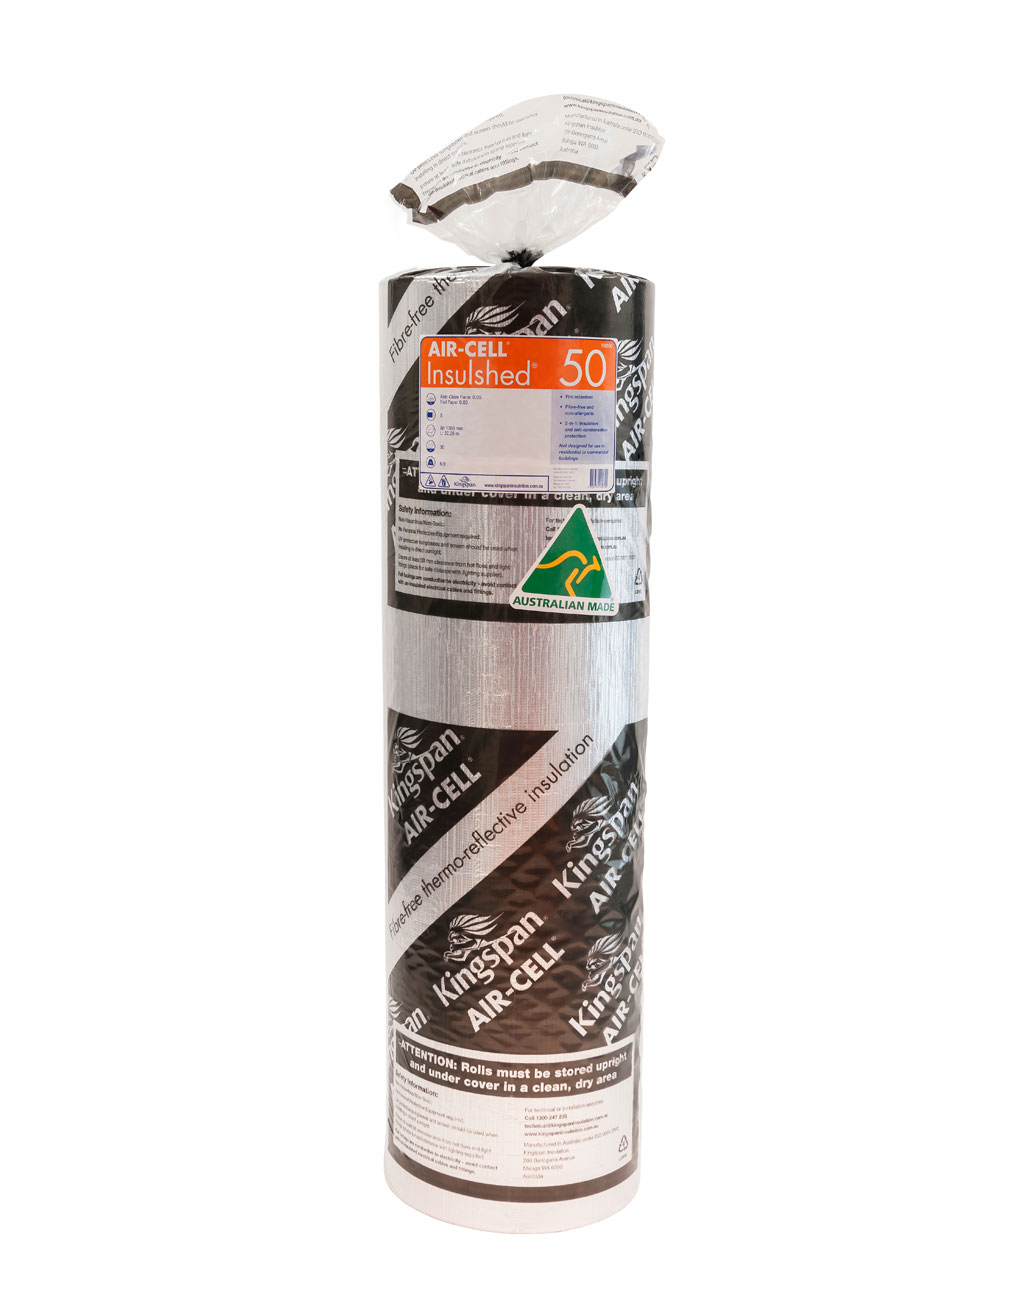 Buy Kingspan Air-Cell Insulshed Insulation